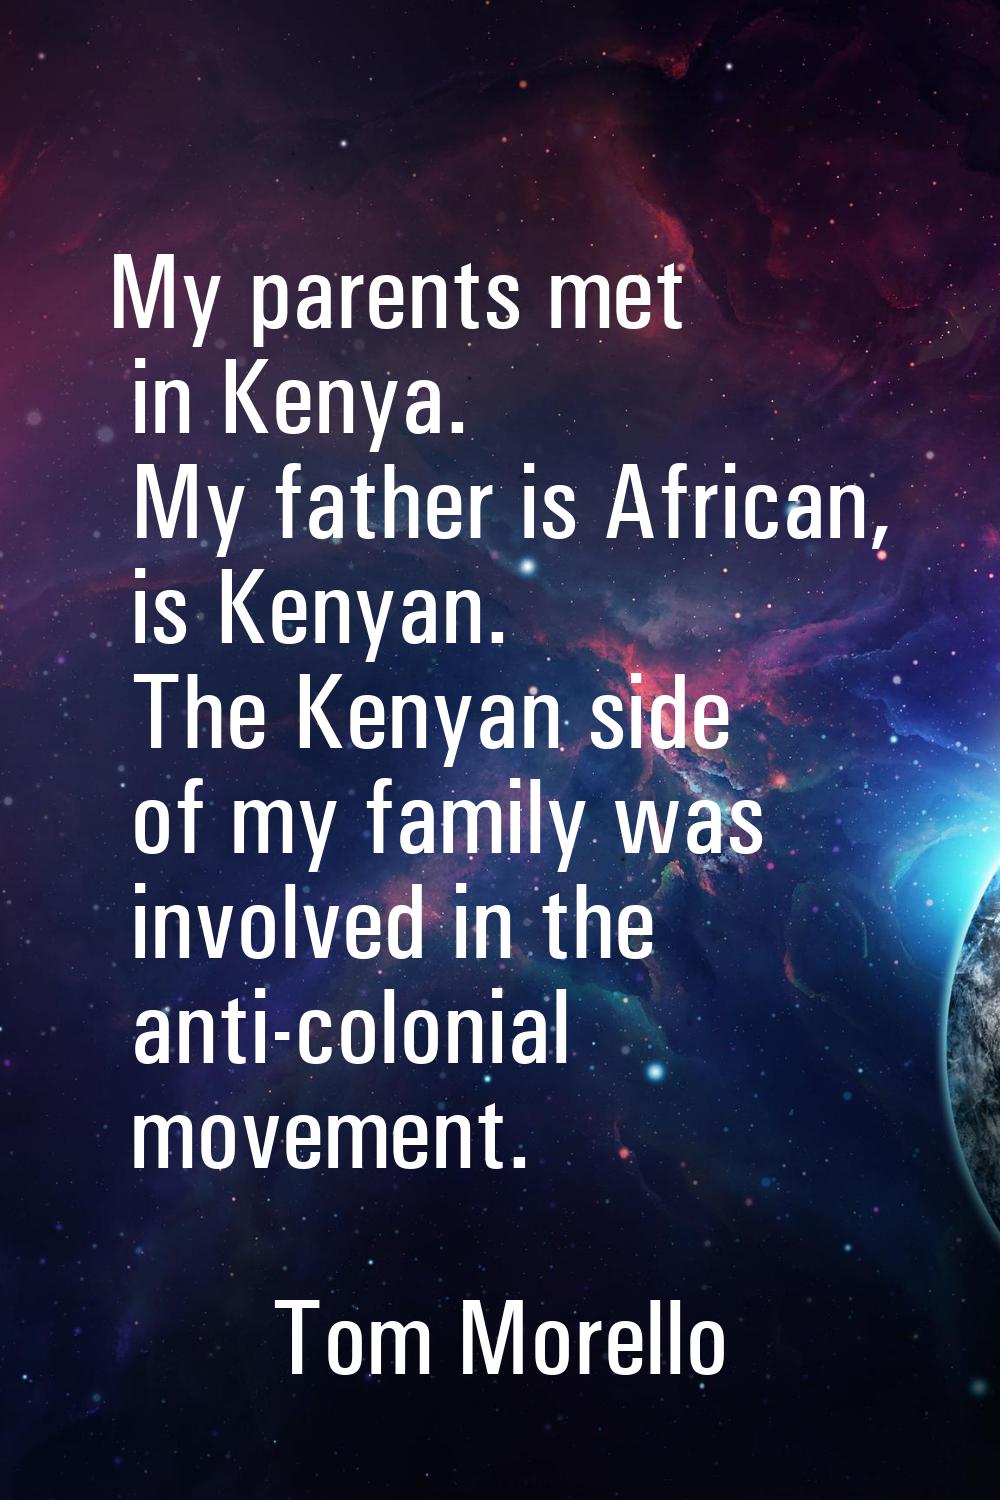 My parents met in Kenya. My father is African, is Kenyan. The Kenyan side of my family was involved